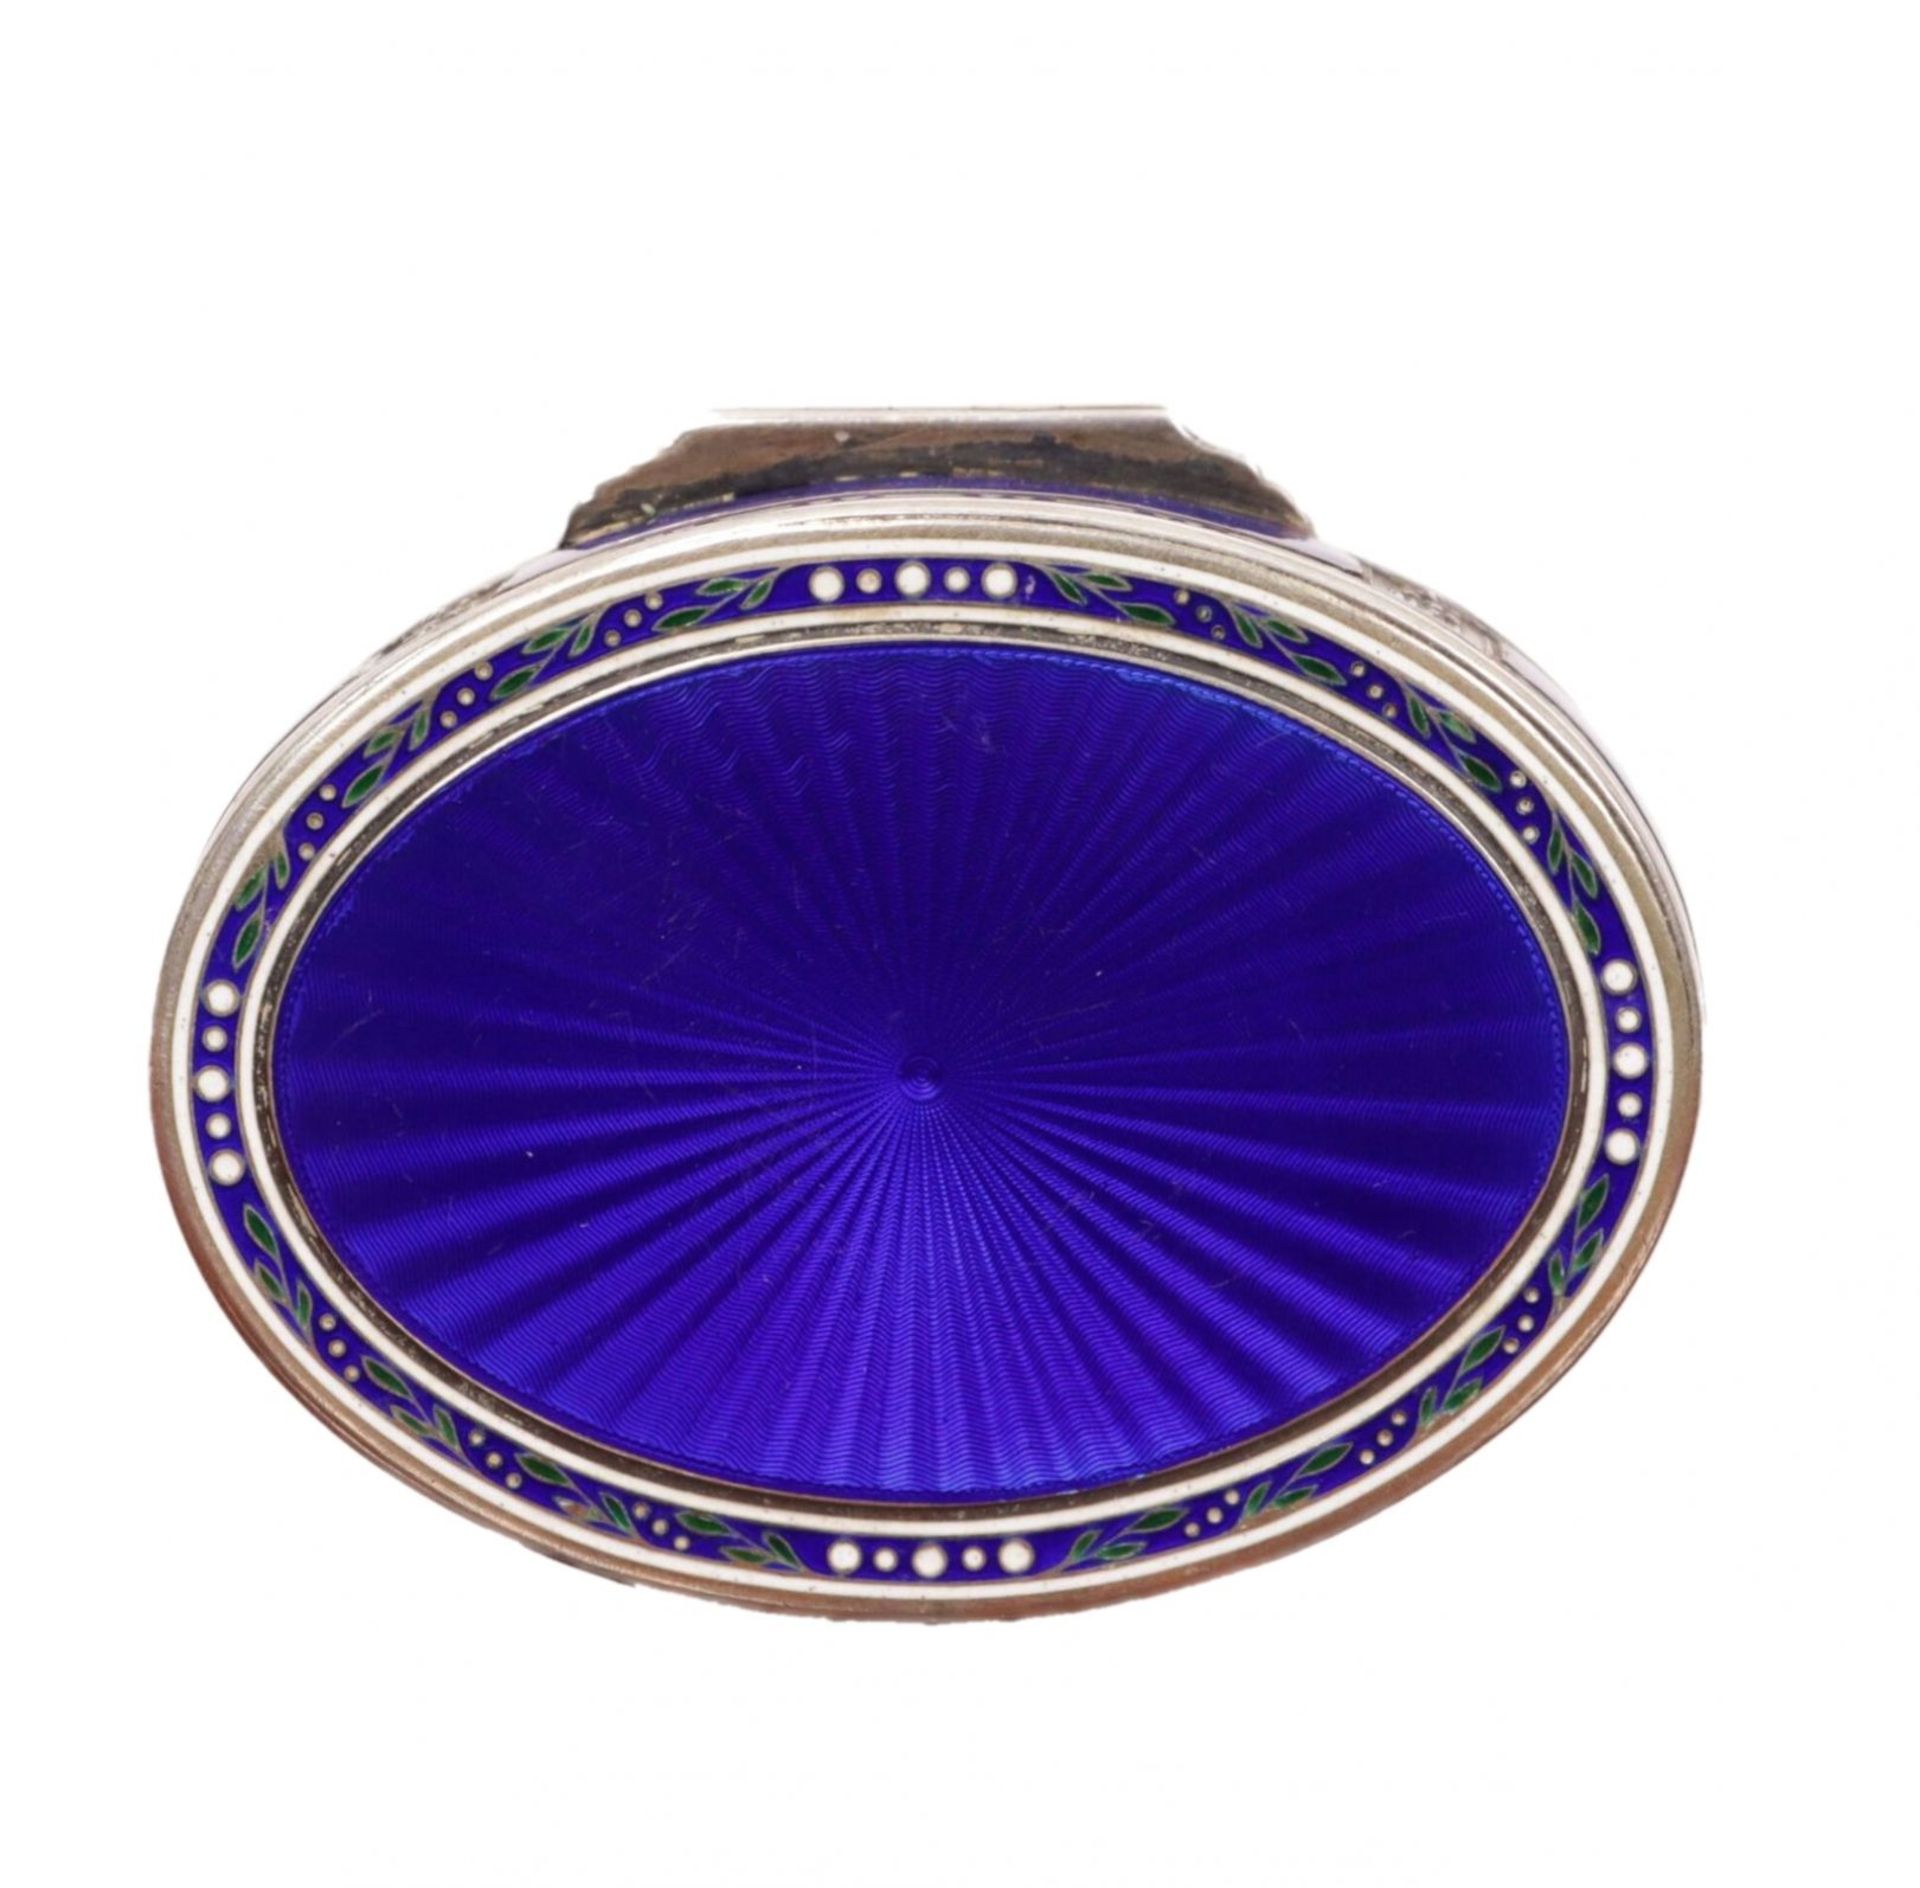 Oval box made of gilded silver with guilloche enamel decor. Early 20th century. - Image 6 of 9